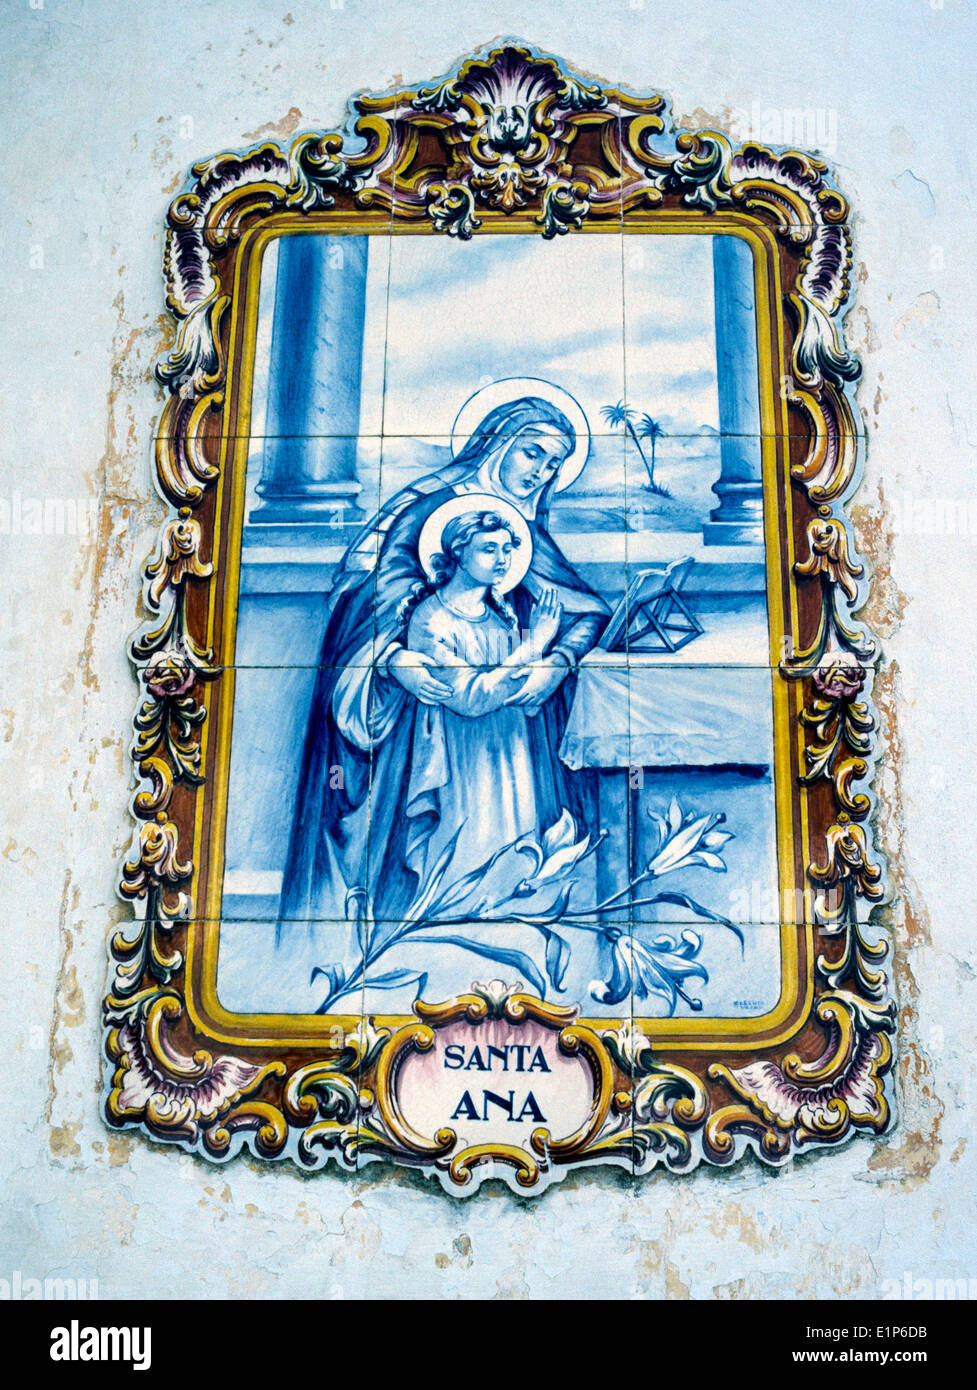 Artistic religious wall tiles pay tribute to Santa (Saint) Ana in the parish of Furnas on Sao Miguel Island in the Azores in the North Atlantic Ocean. Stock Photo